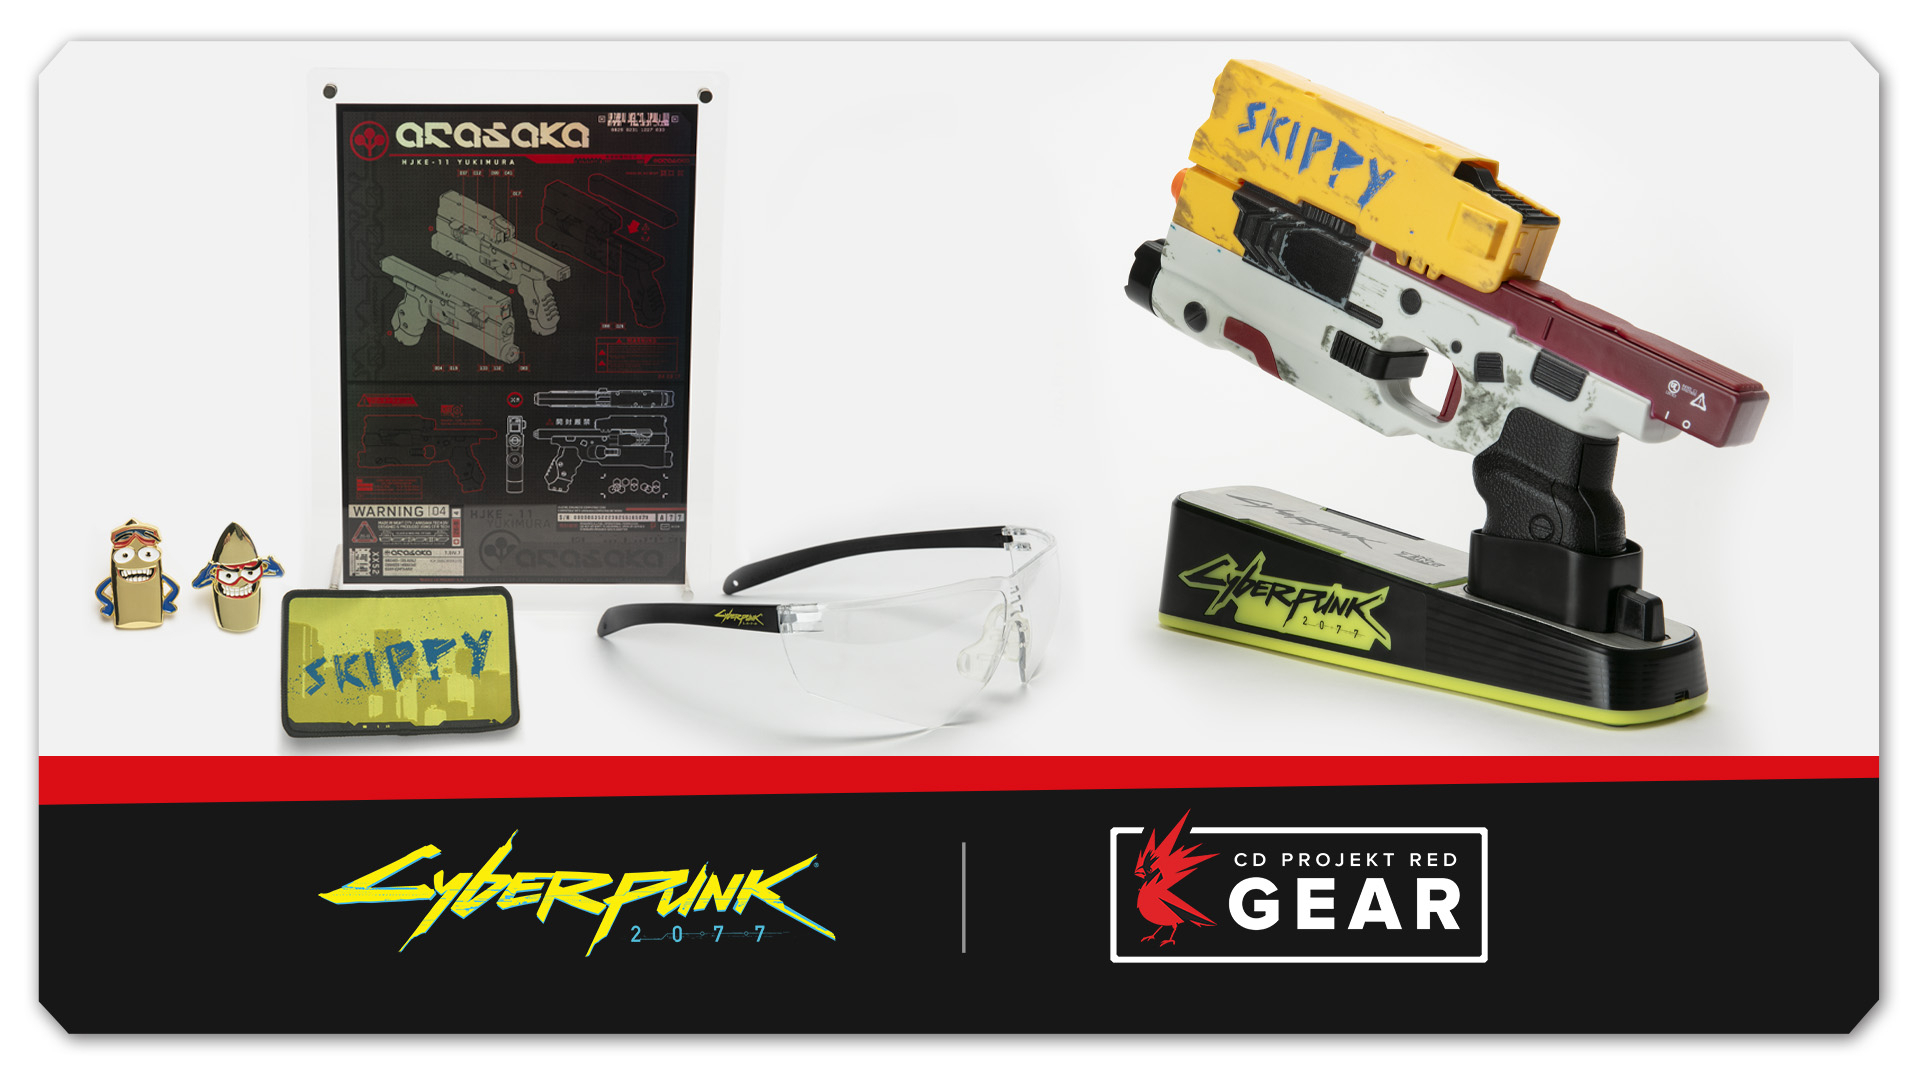 CD Projekt Red will turn the talking pistol “Skippy” from Cyberpunk 2077 into a real blaster worth 13 thousand rubles - Technics, Electronics, Cyberpunk 2077, Toys, Games, New items